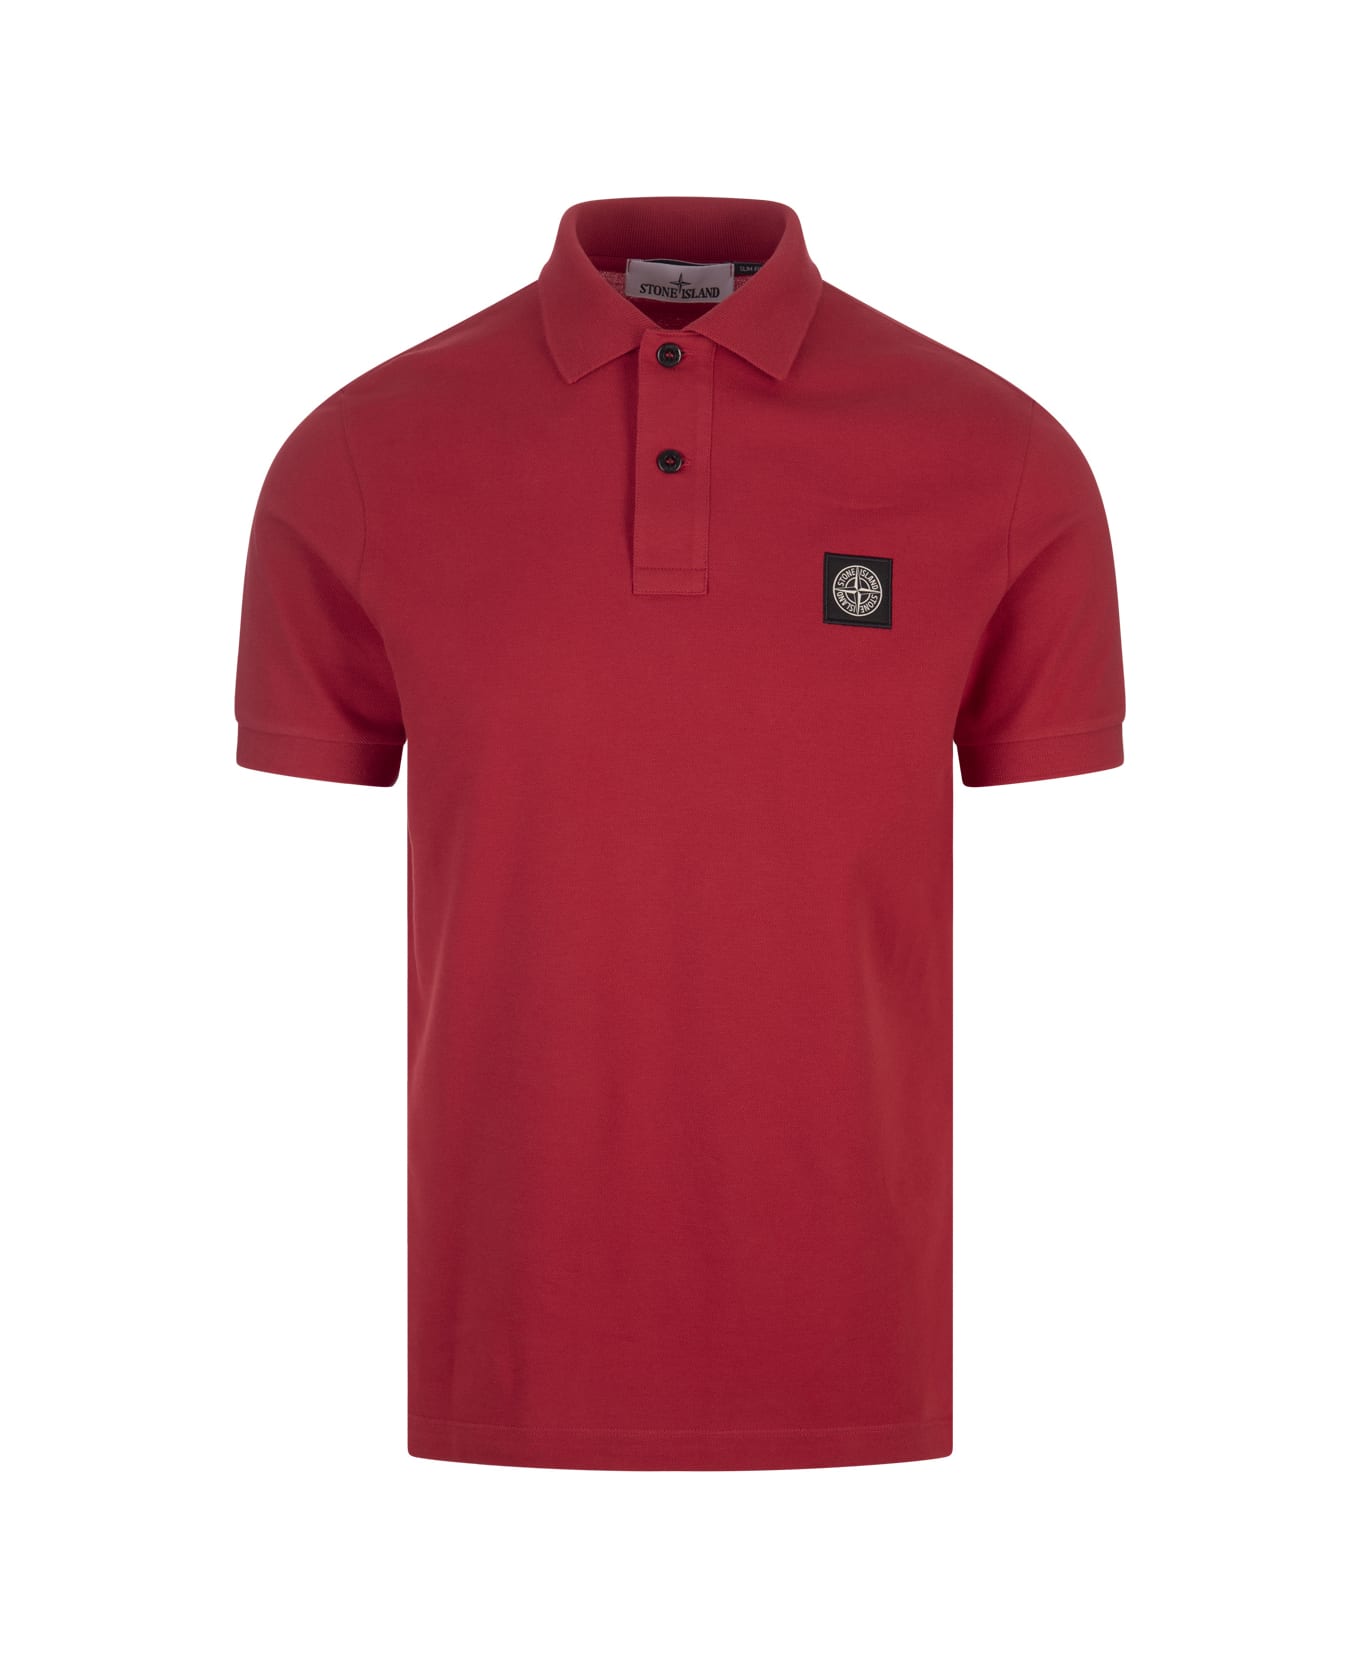 Stone Island Red Piqué Slim Fit Polo Shirt - Red